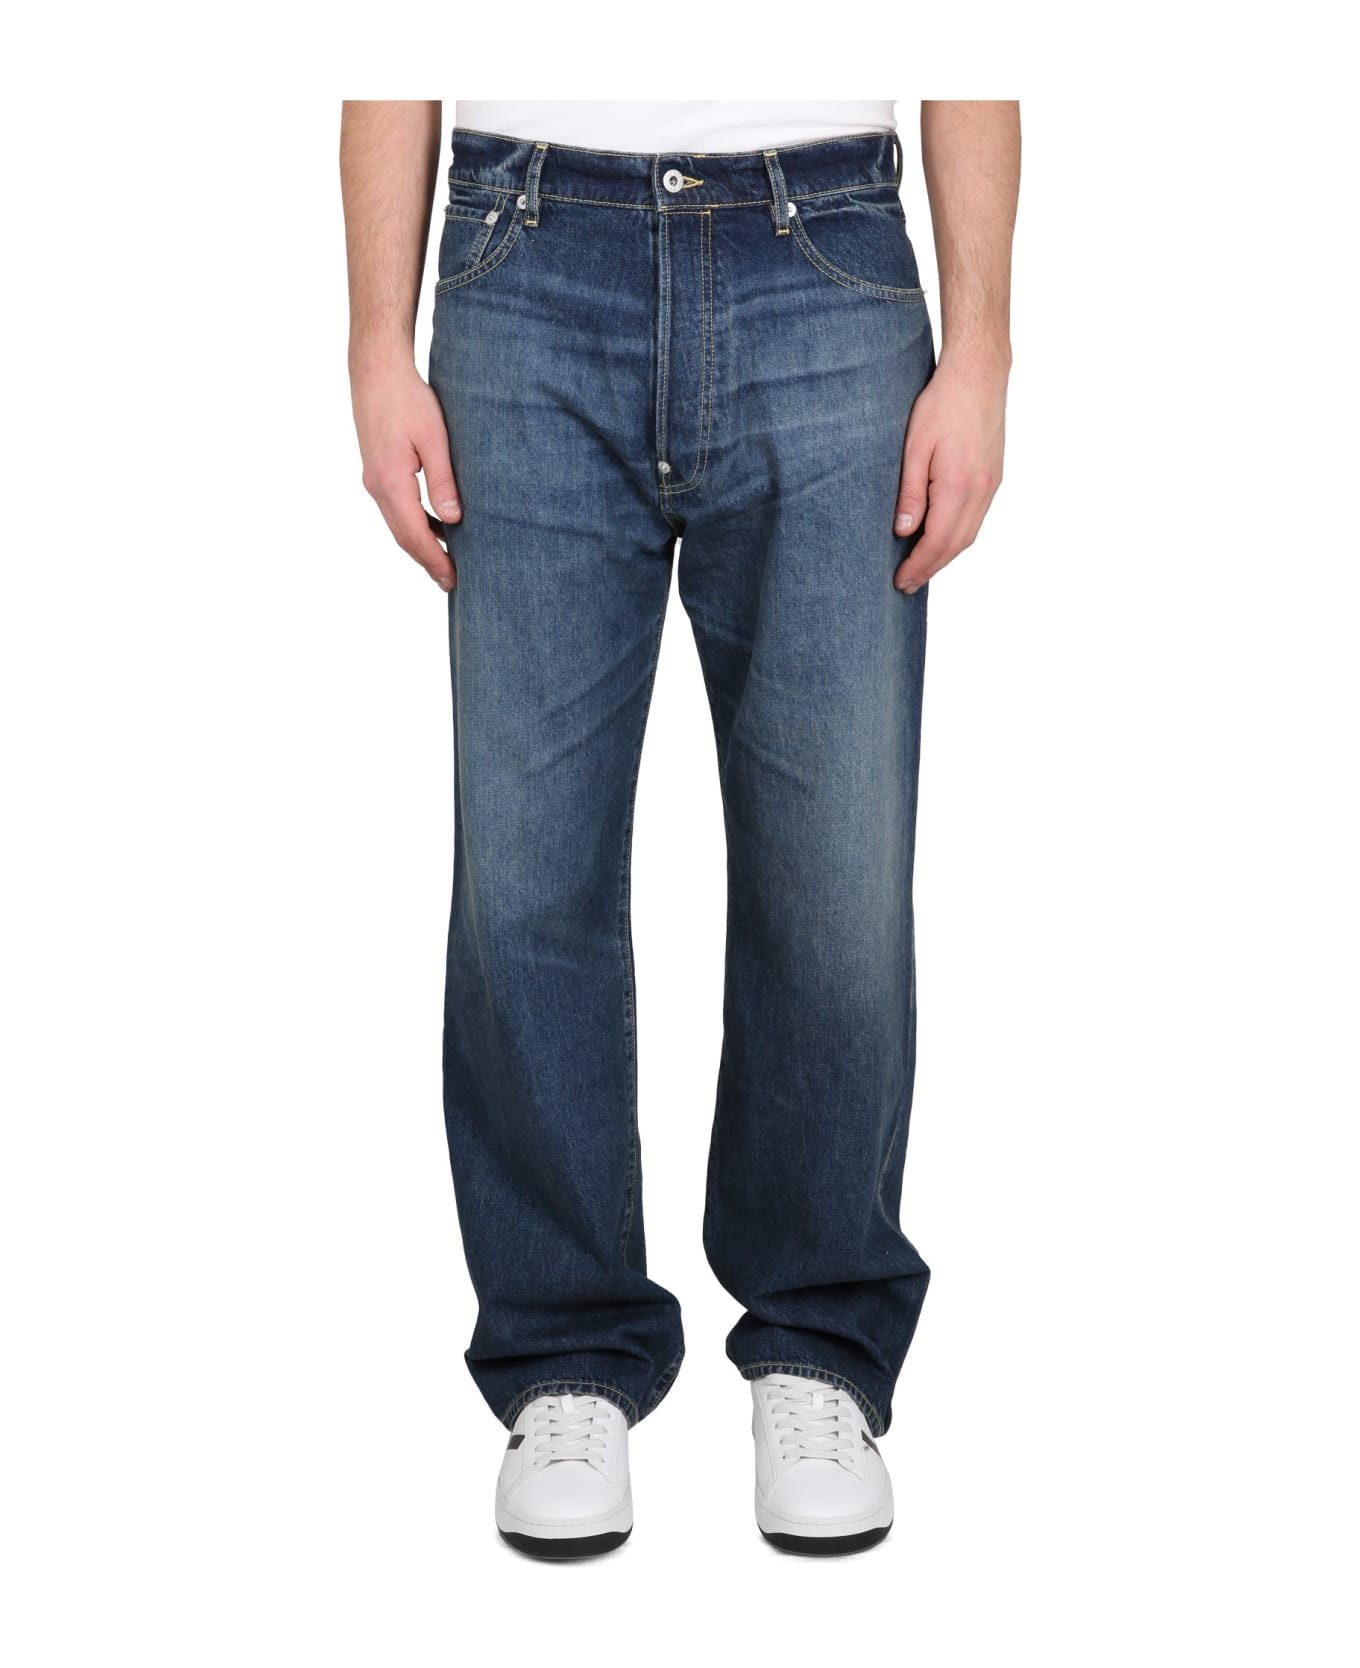 Kenzo Relaxed Fit Jeans - BLU